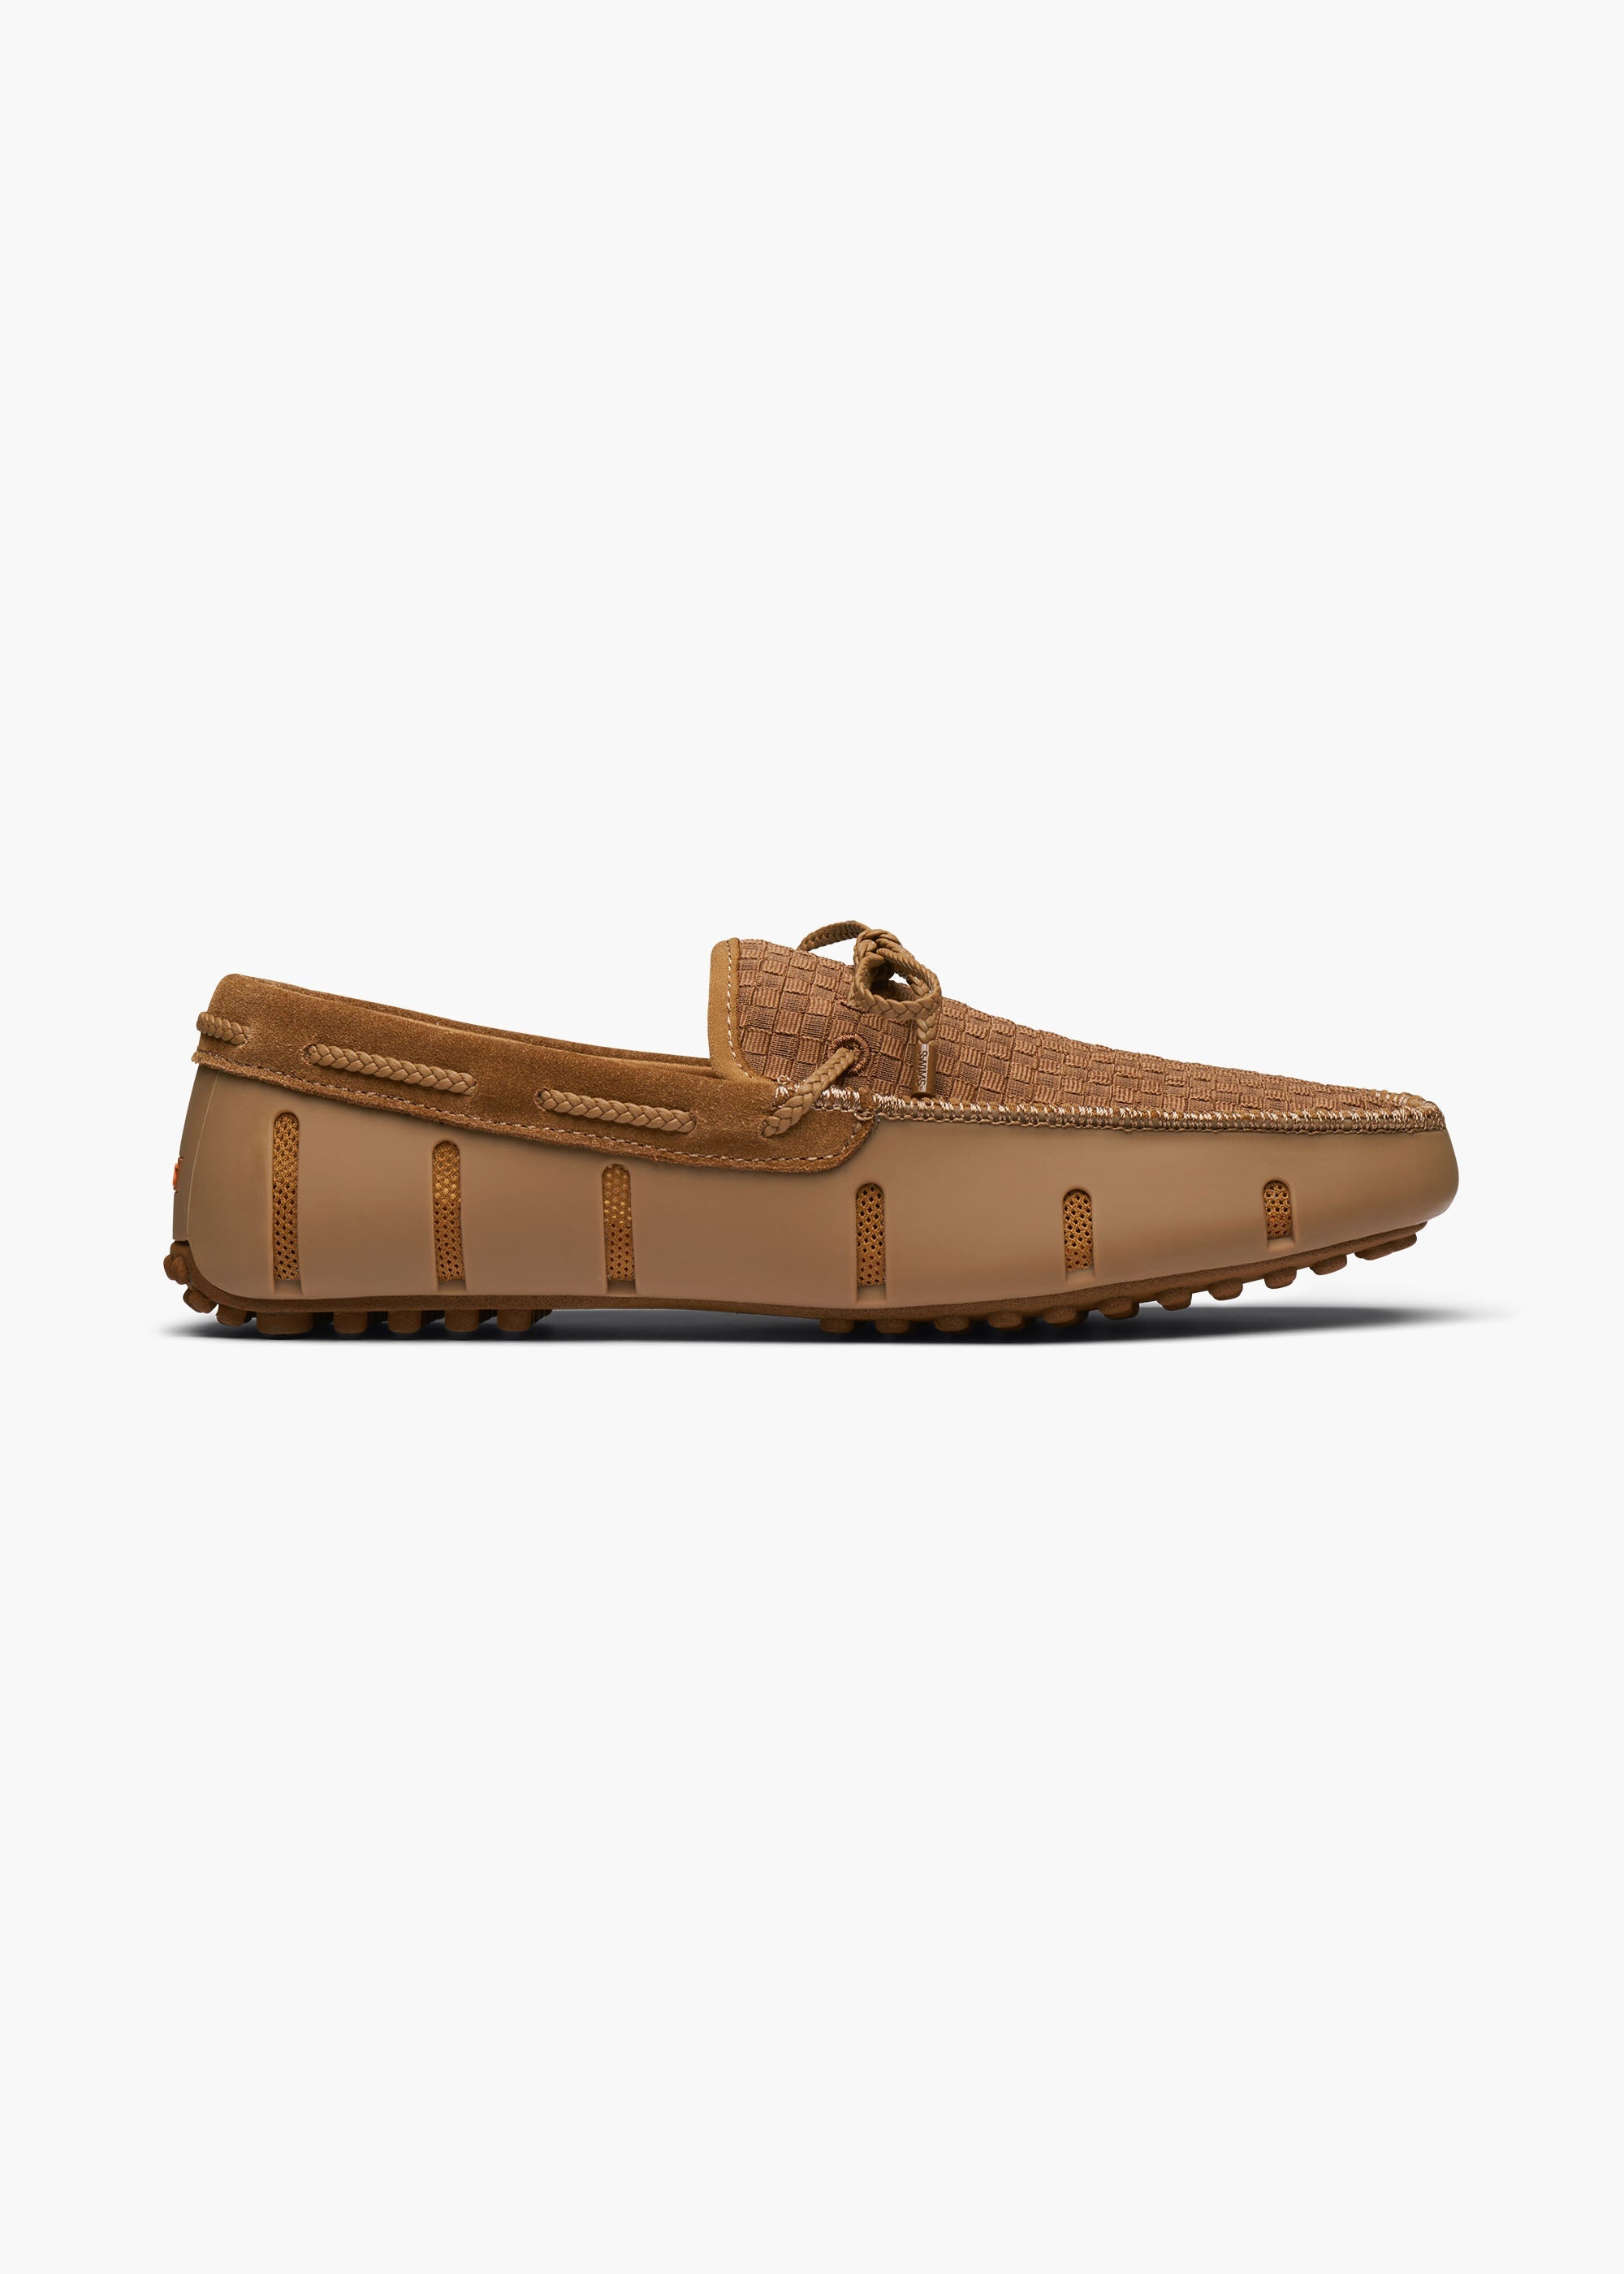 Products by Louis Vuitton: All-In loafer